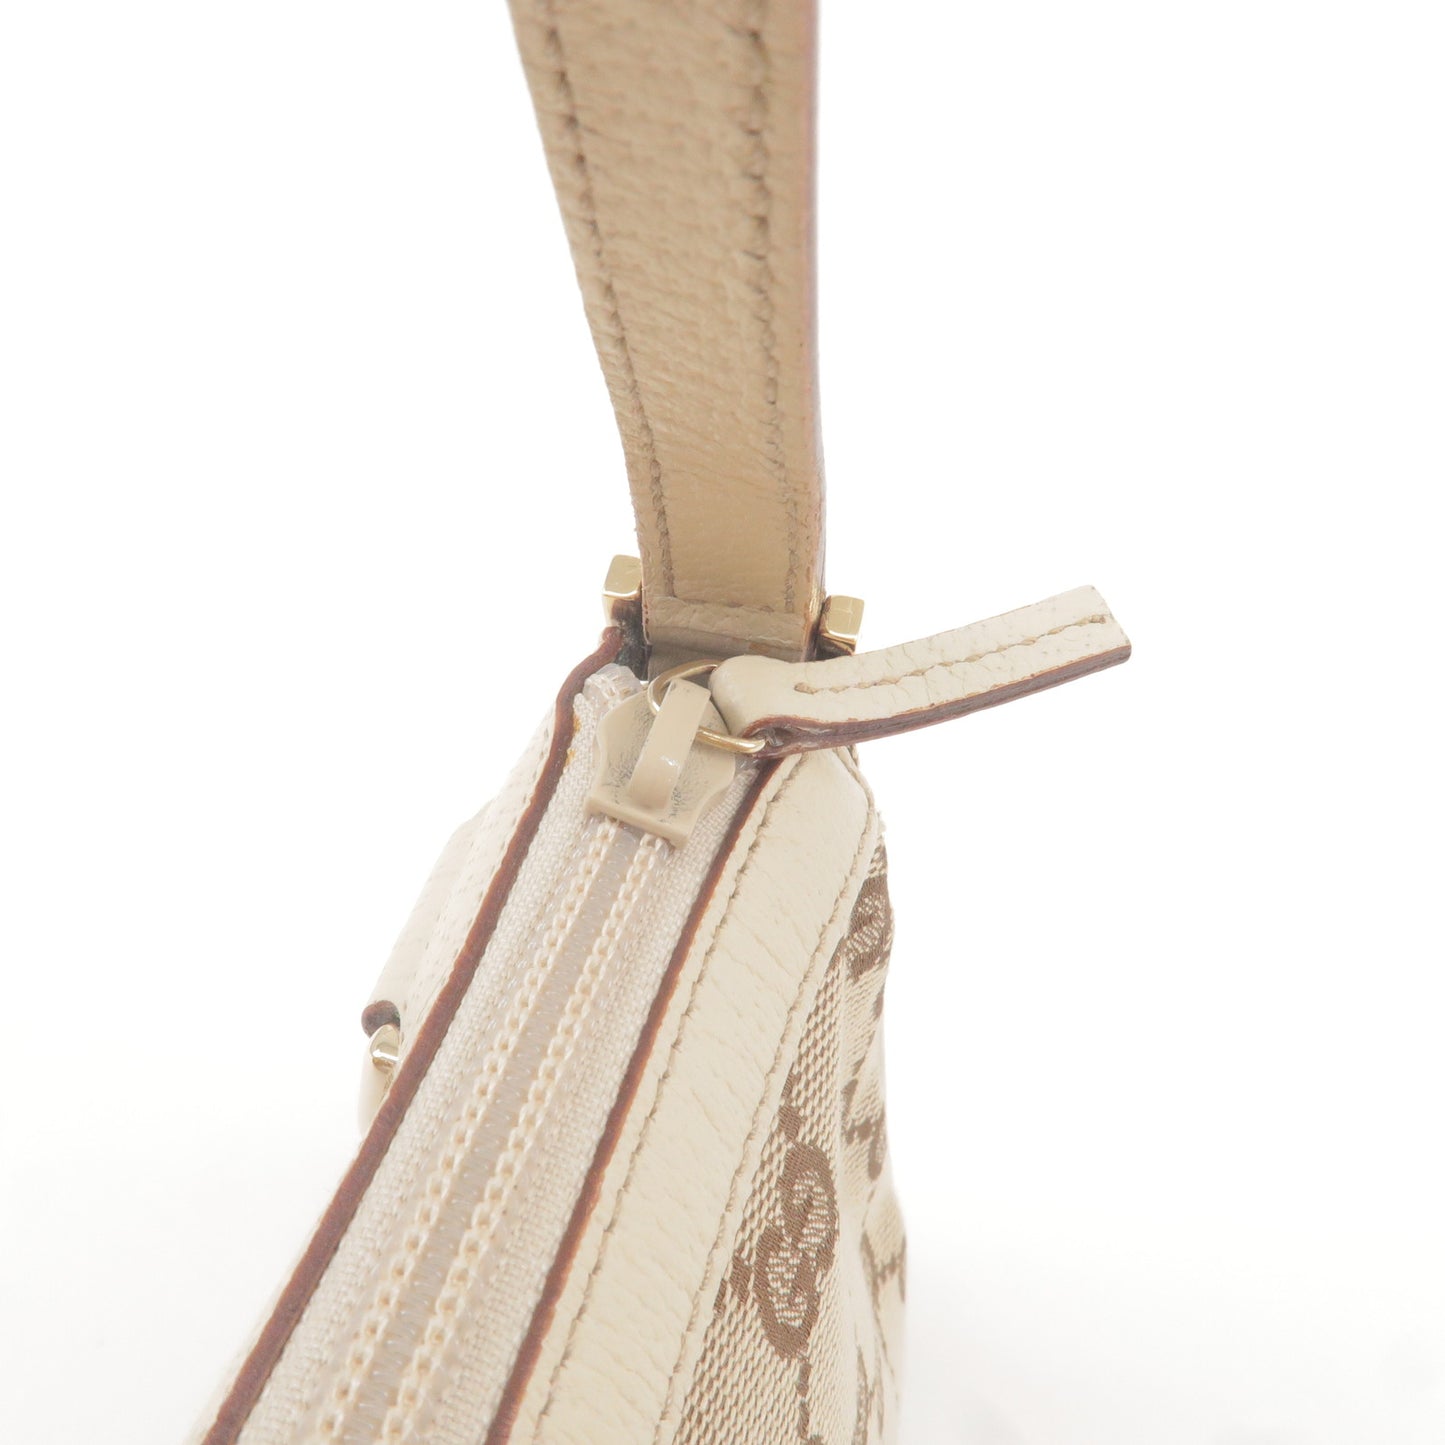 GUCCI Abbey GG Canvas Leather Bag Pouch Beige White 145750